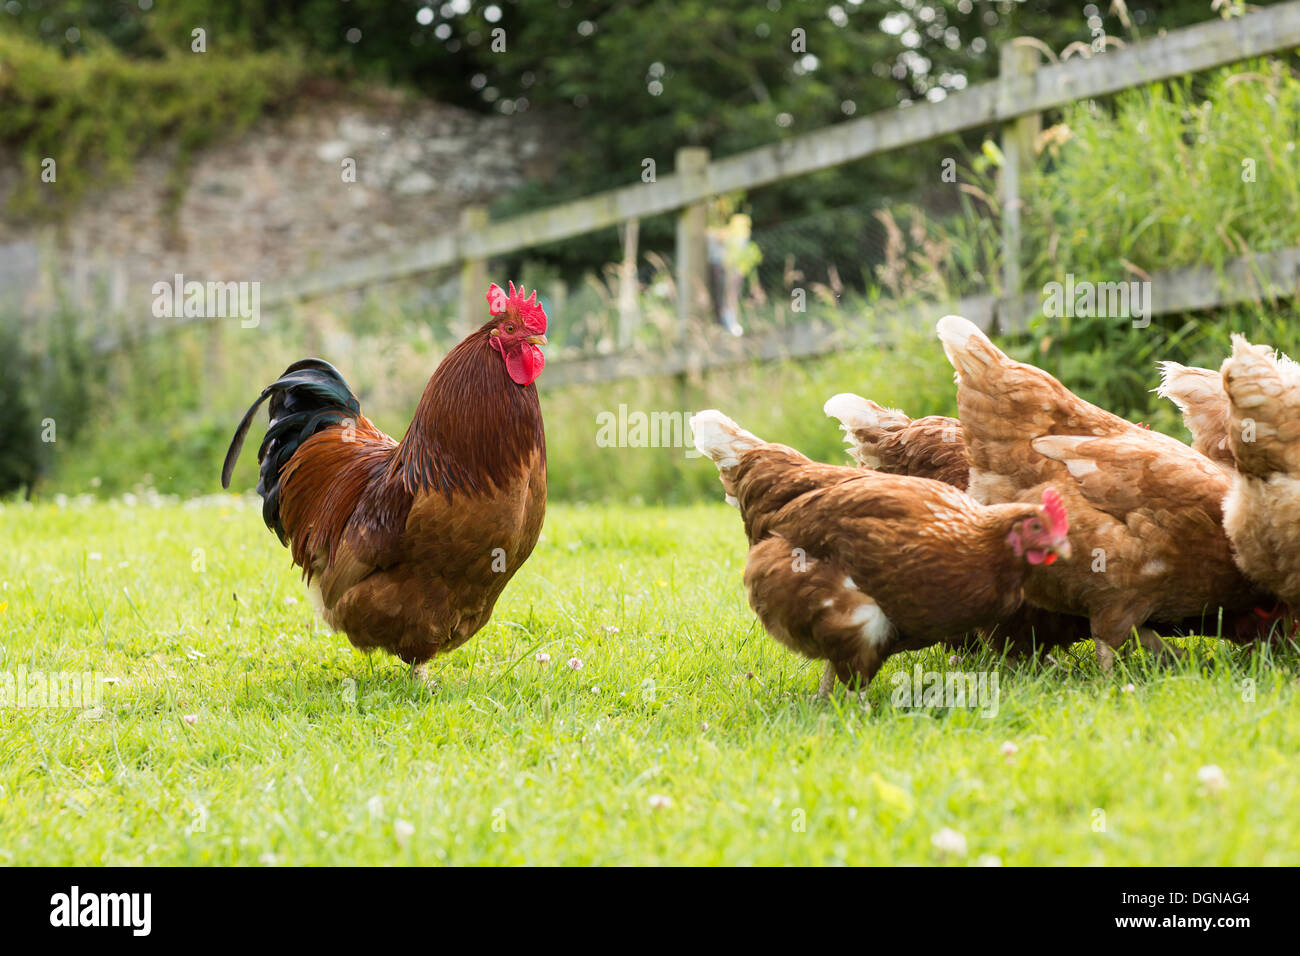 Chickens on a lawn with a cockerel Stock Photo